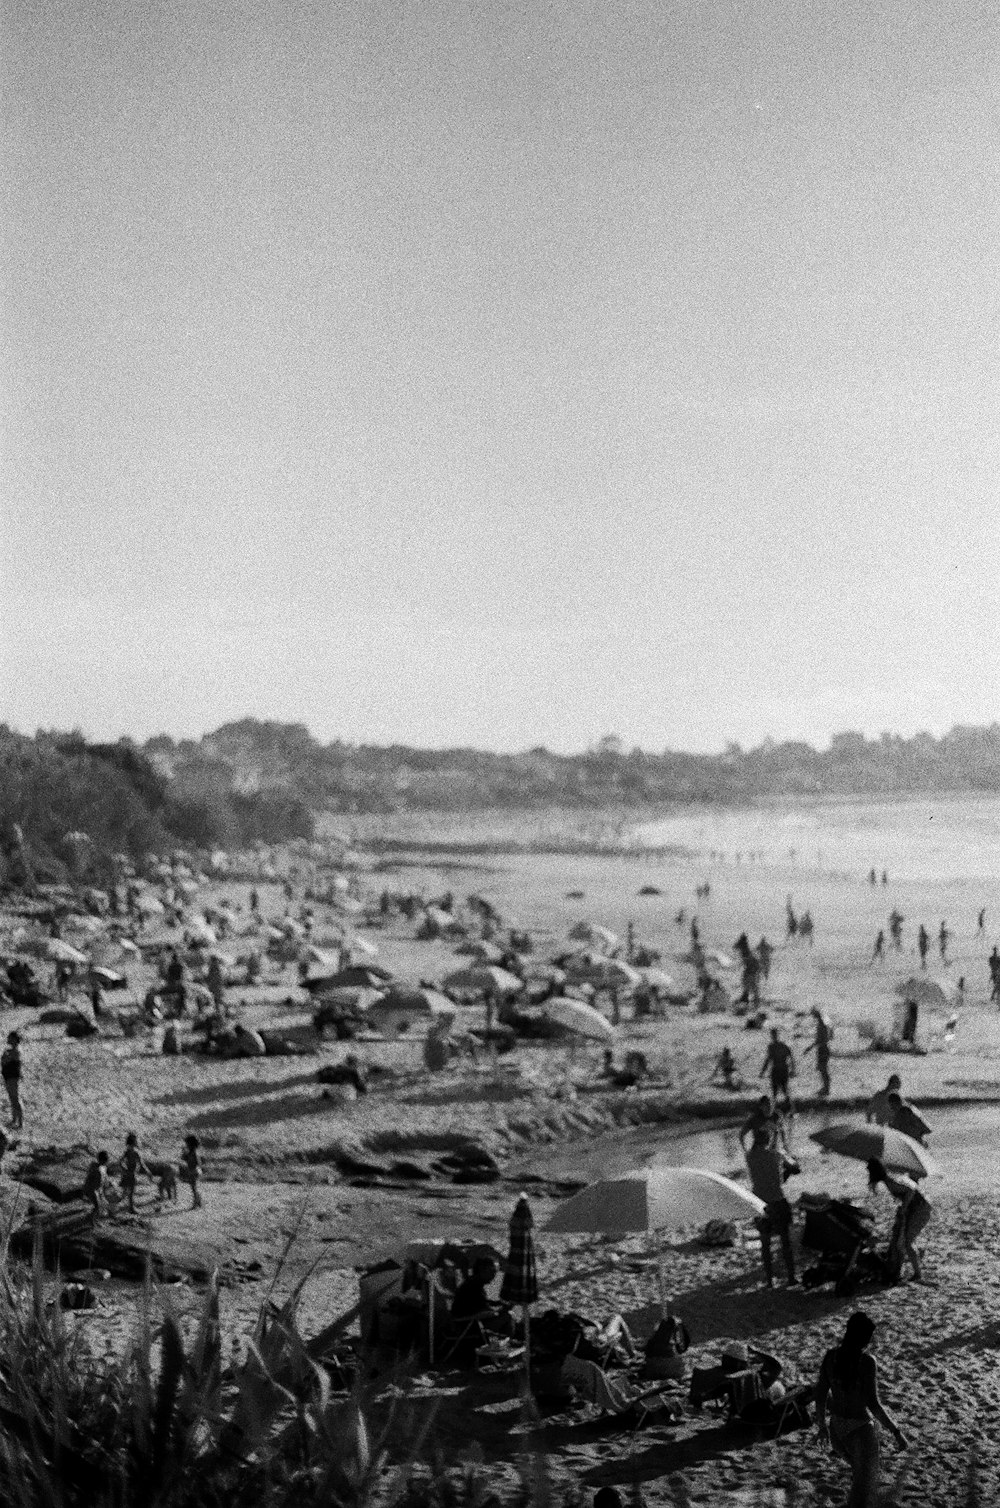 people on a beach